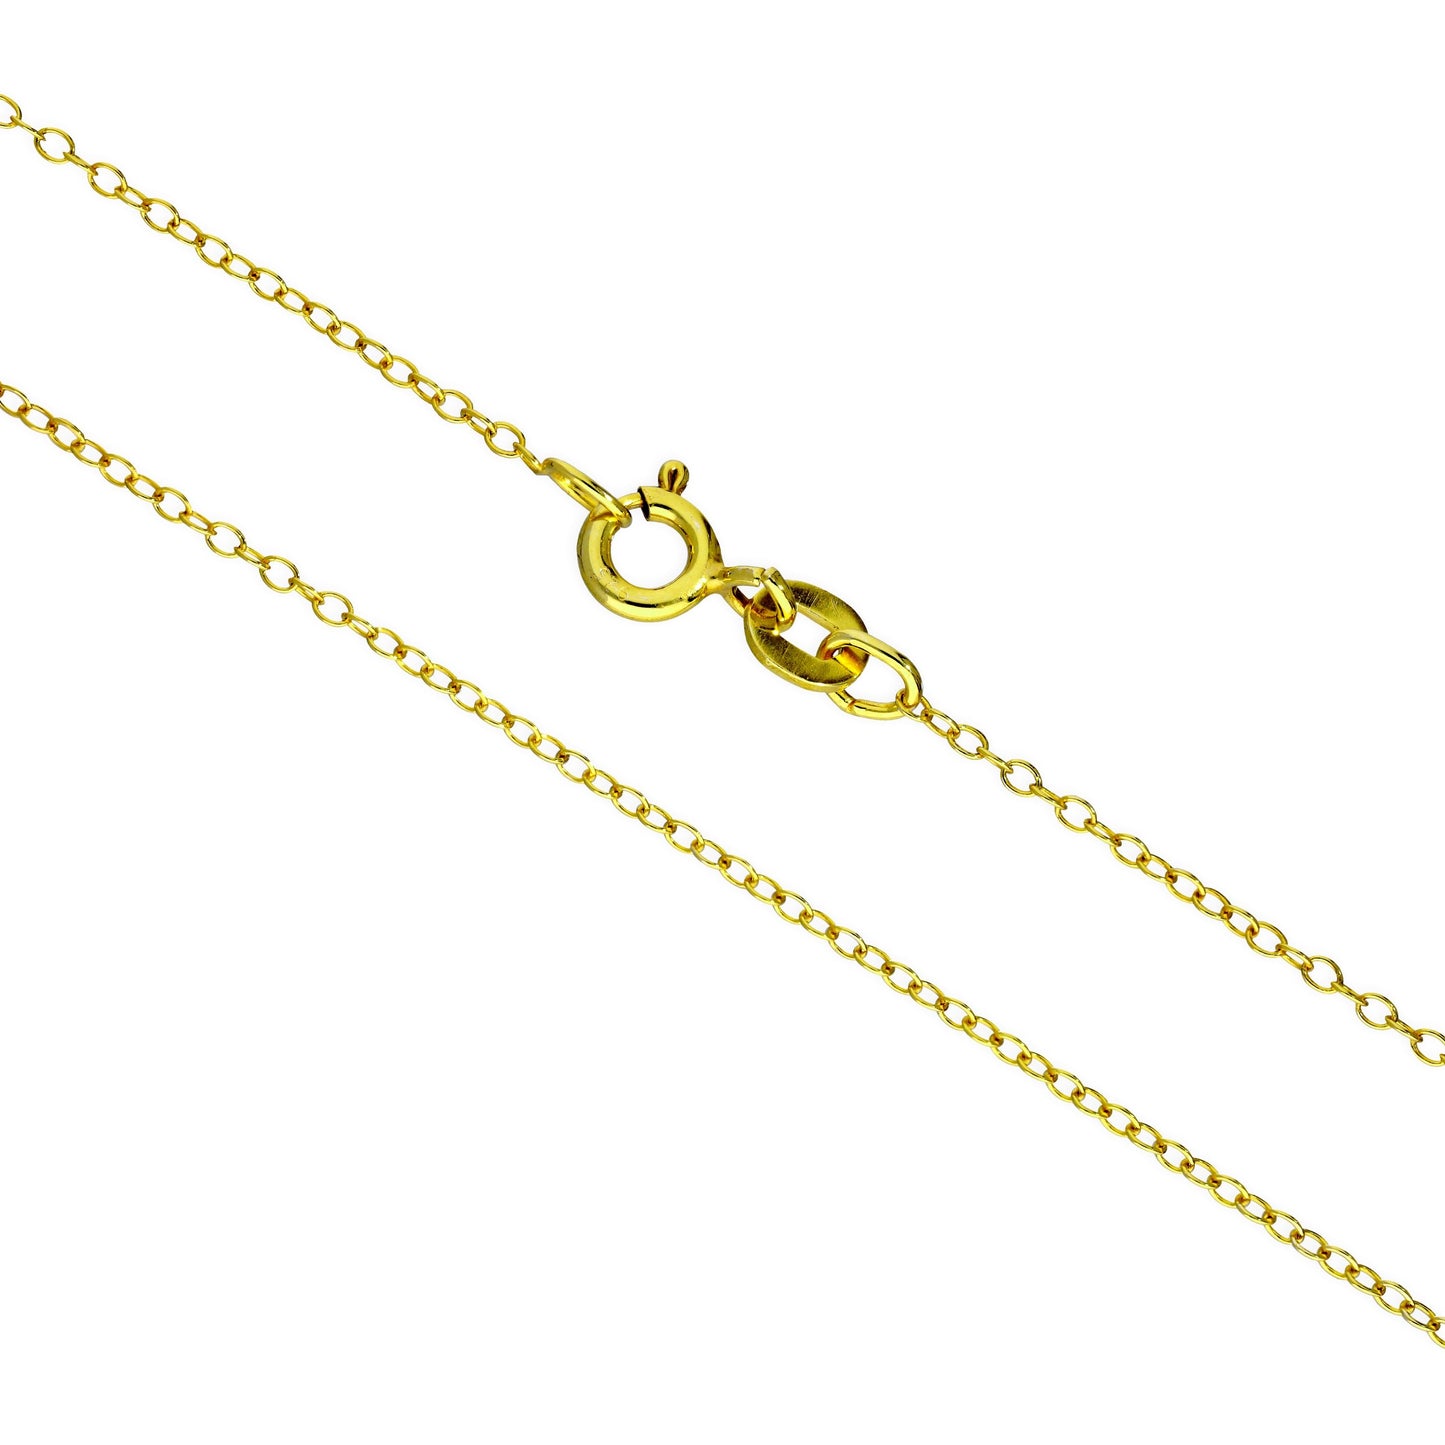 Gold Plated Sterling Silver Fine Belcher Chain Necklace 16 - 22 Inches